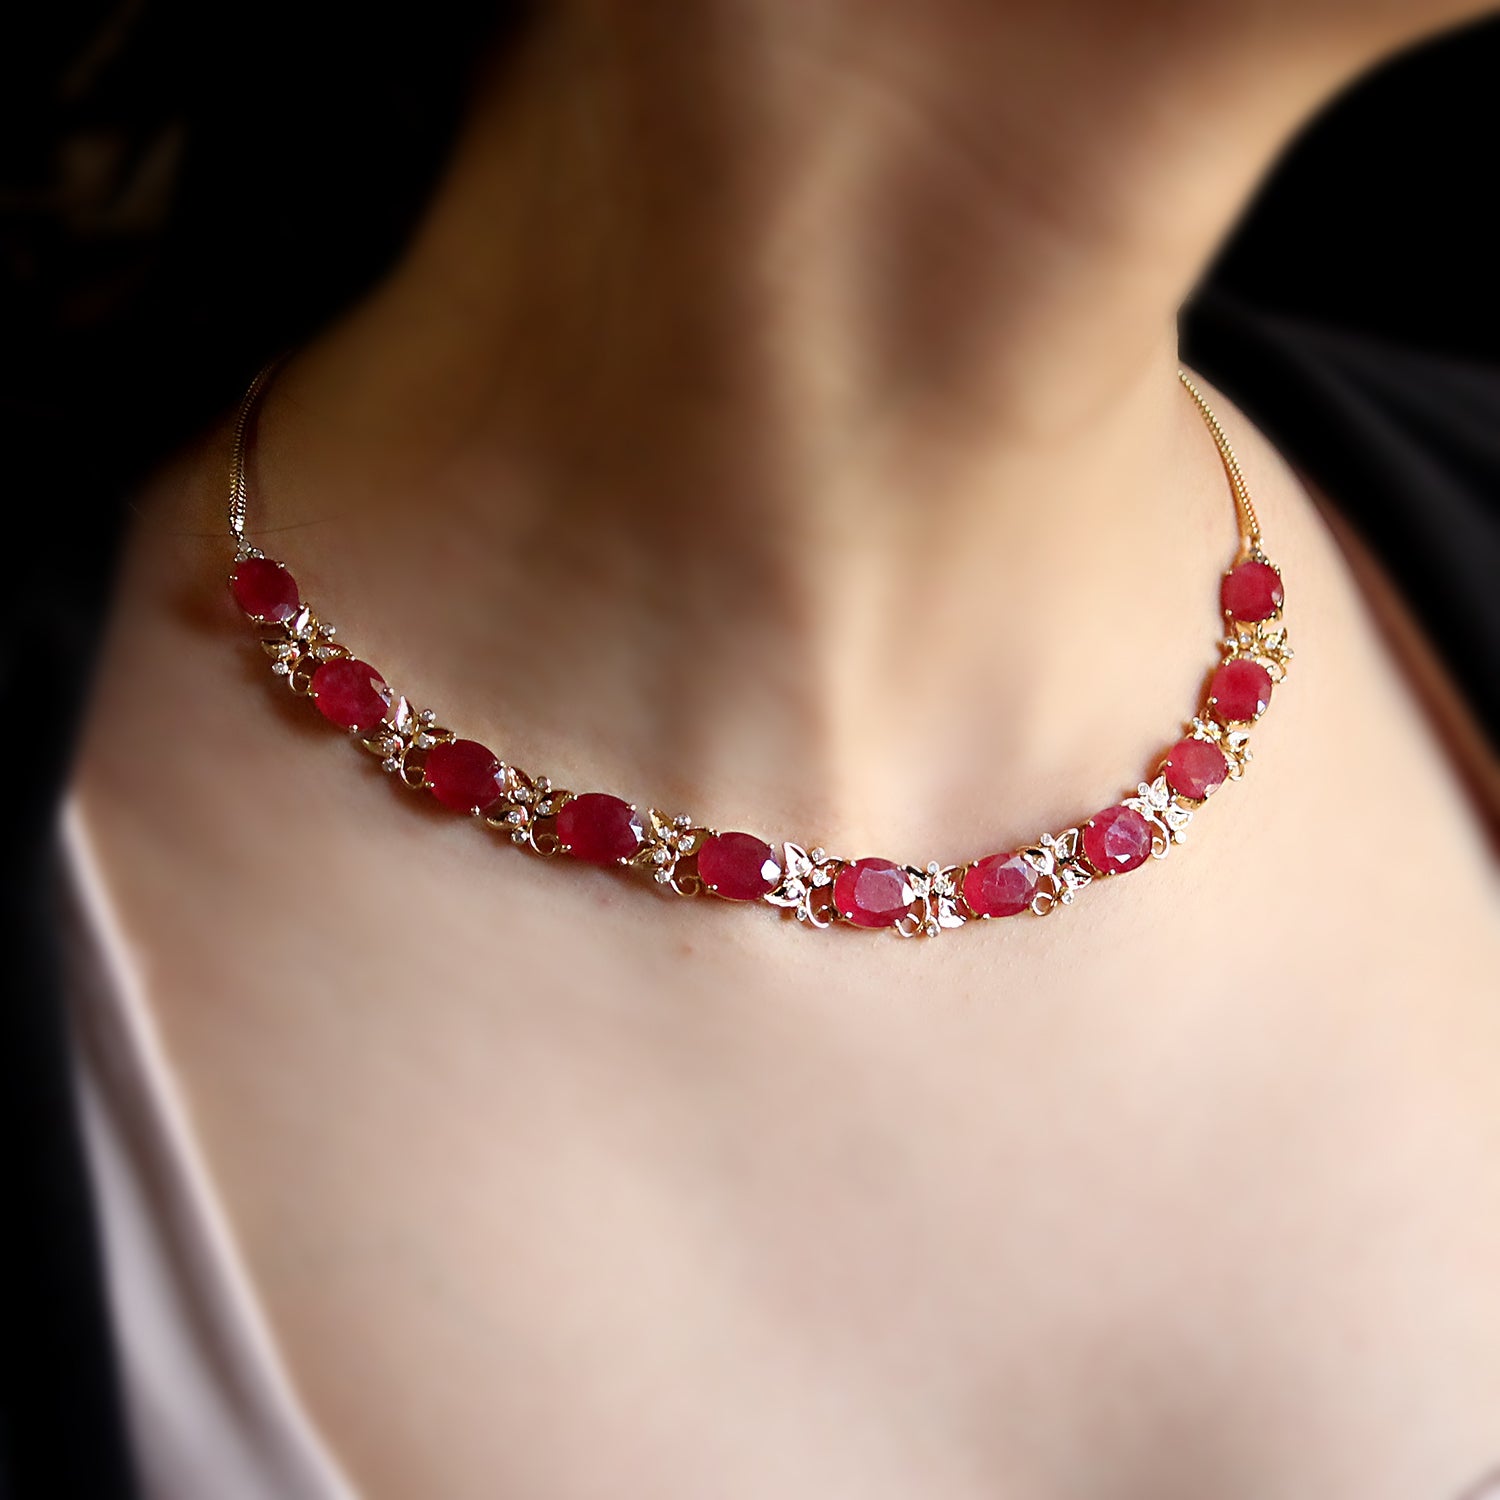 Platinum, White Gold, 10.87ct Burma Ruby And 13.45ct Diamond Necklace  Available For Immediate Sale At Sotheby's